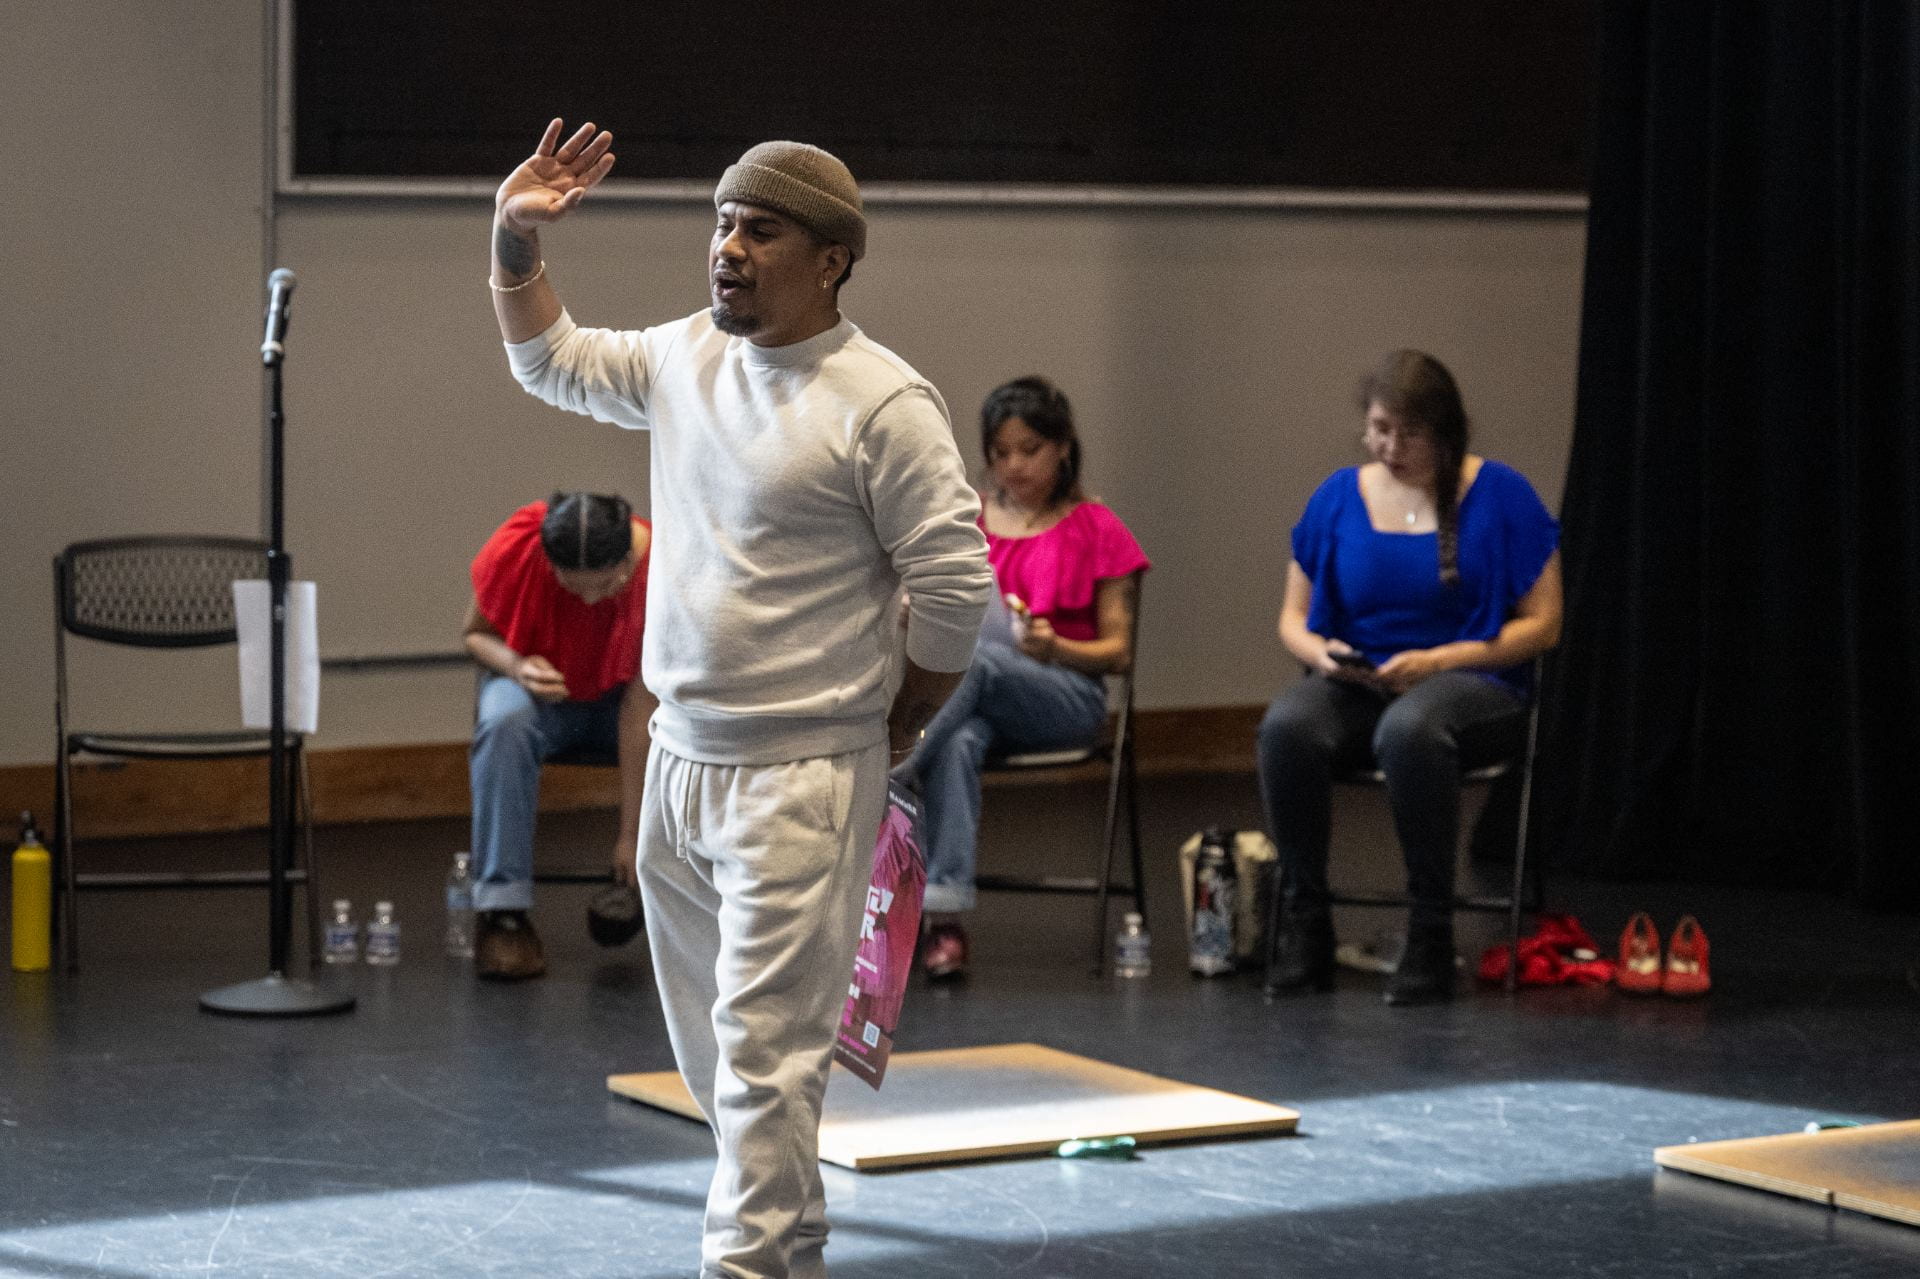 Yosimar Reyes, poet and MACLA performing artist in residence, introduced the master class at the Hammer. Photo by Robert C. Bain.